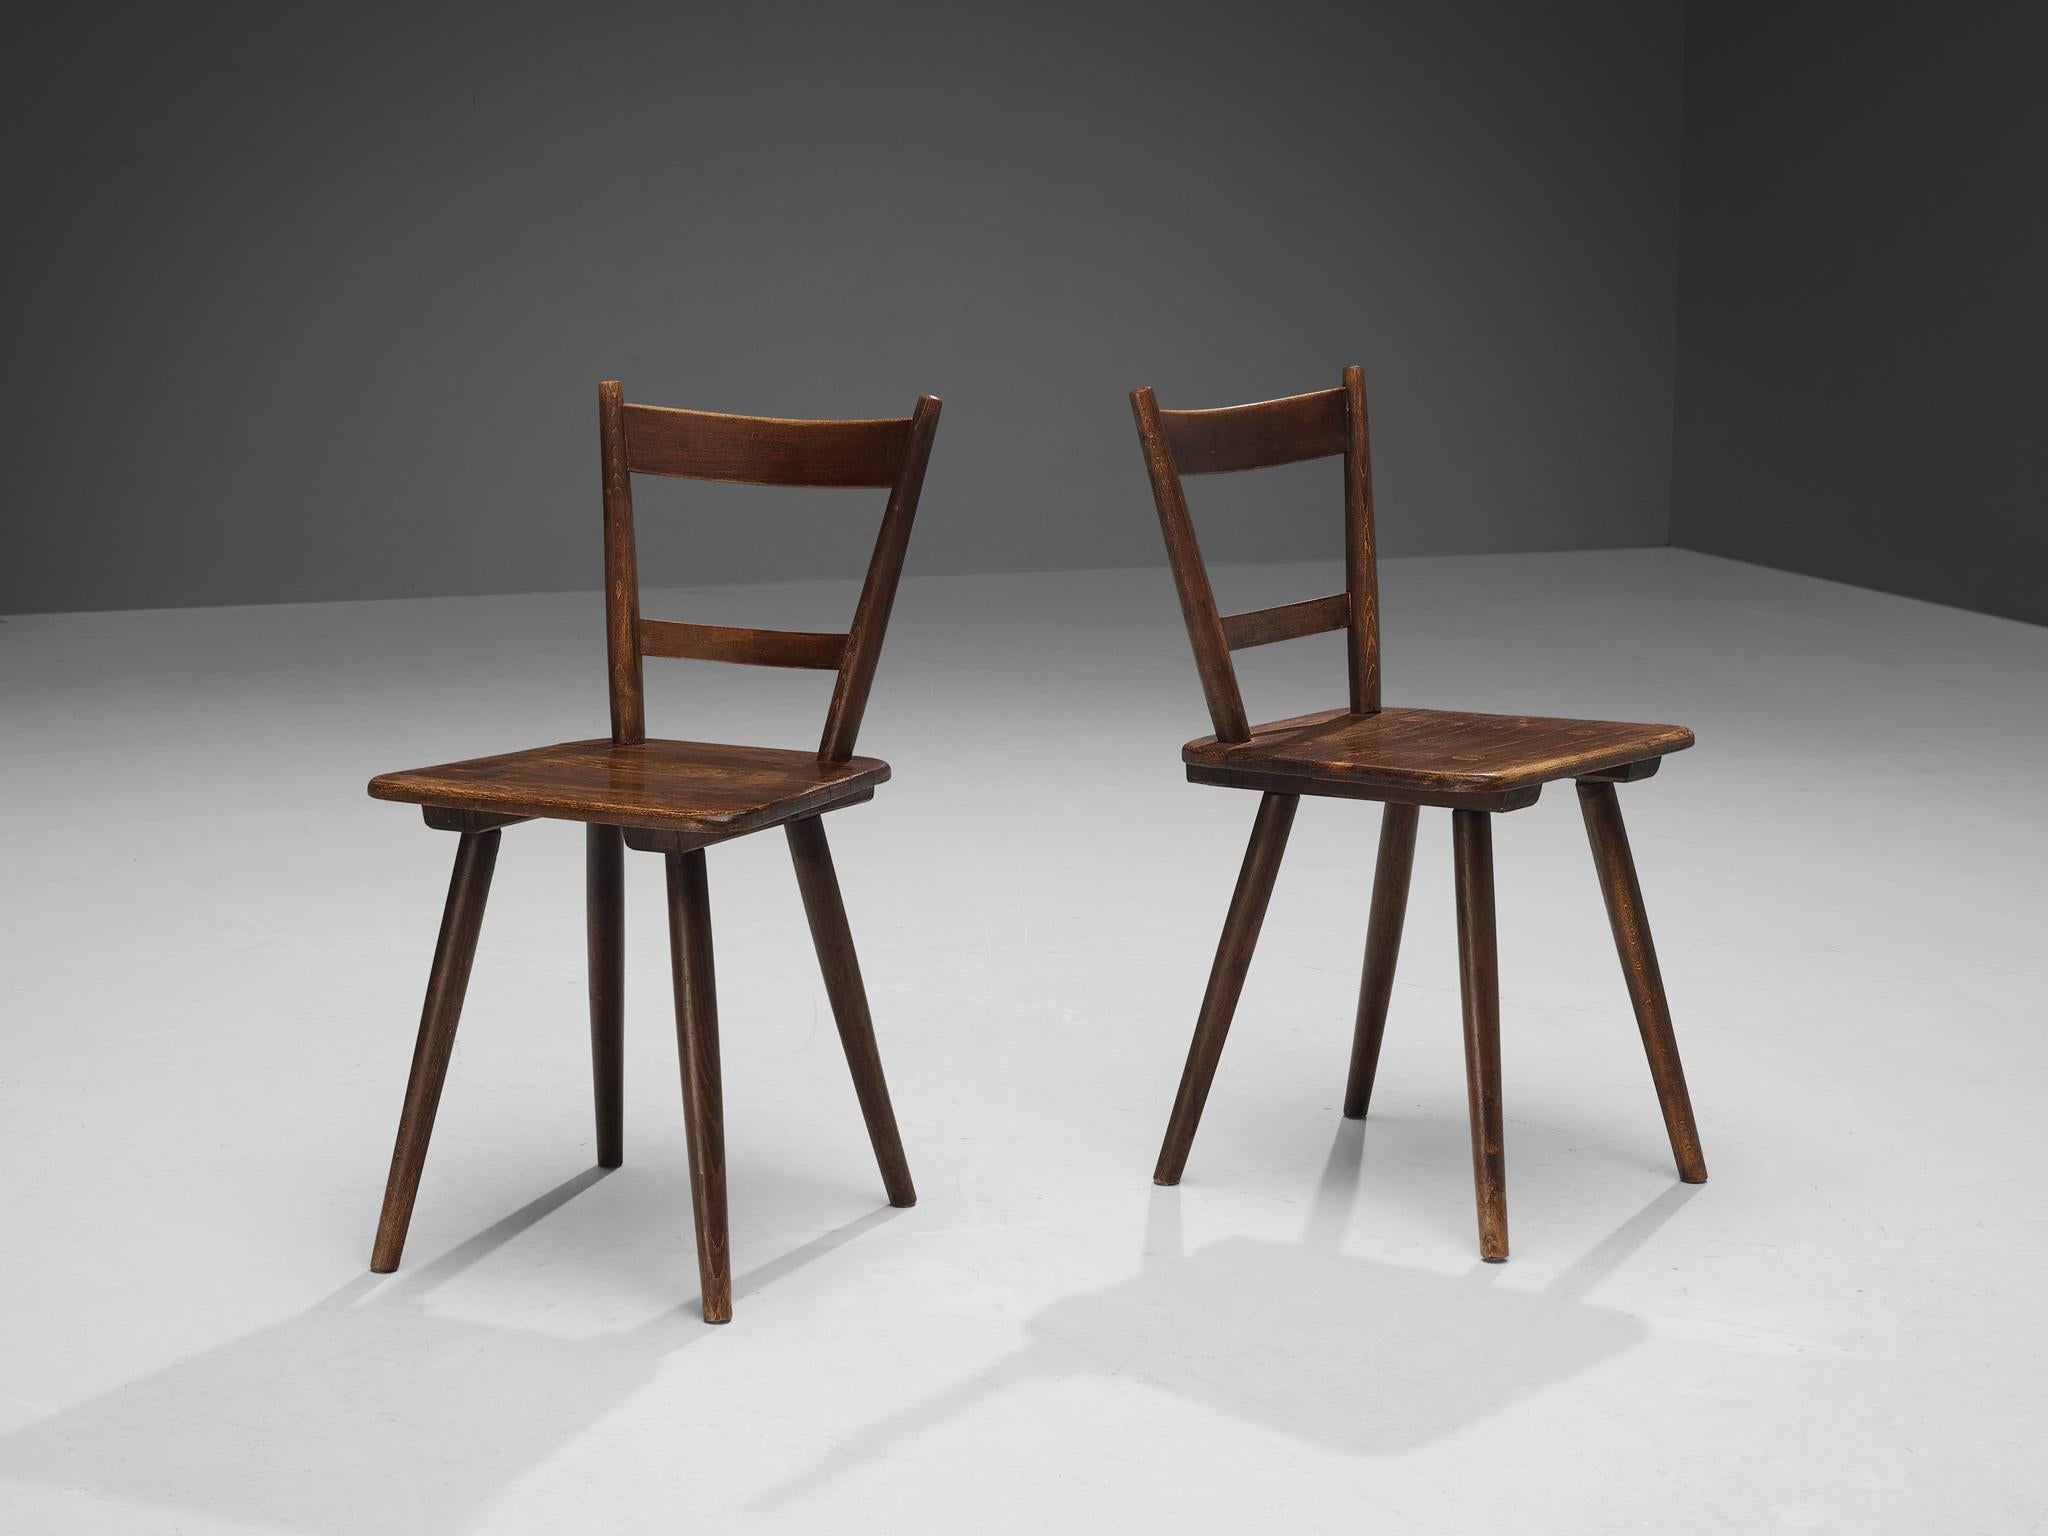 Dining chairs, stained wood, France, late 1940s. 

Rustic dining chairs manufactured in France. Simple yet stylish, these chairs feature a modest frame with sleek, elegant elements. Note for example the tapered legs slightly pointing outwards. The